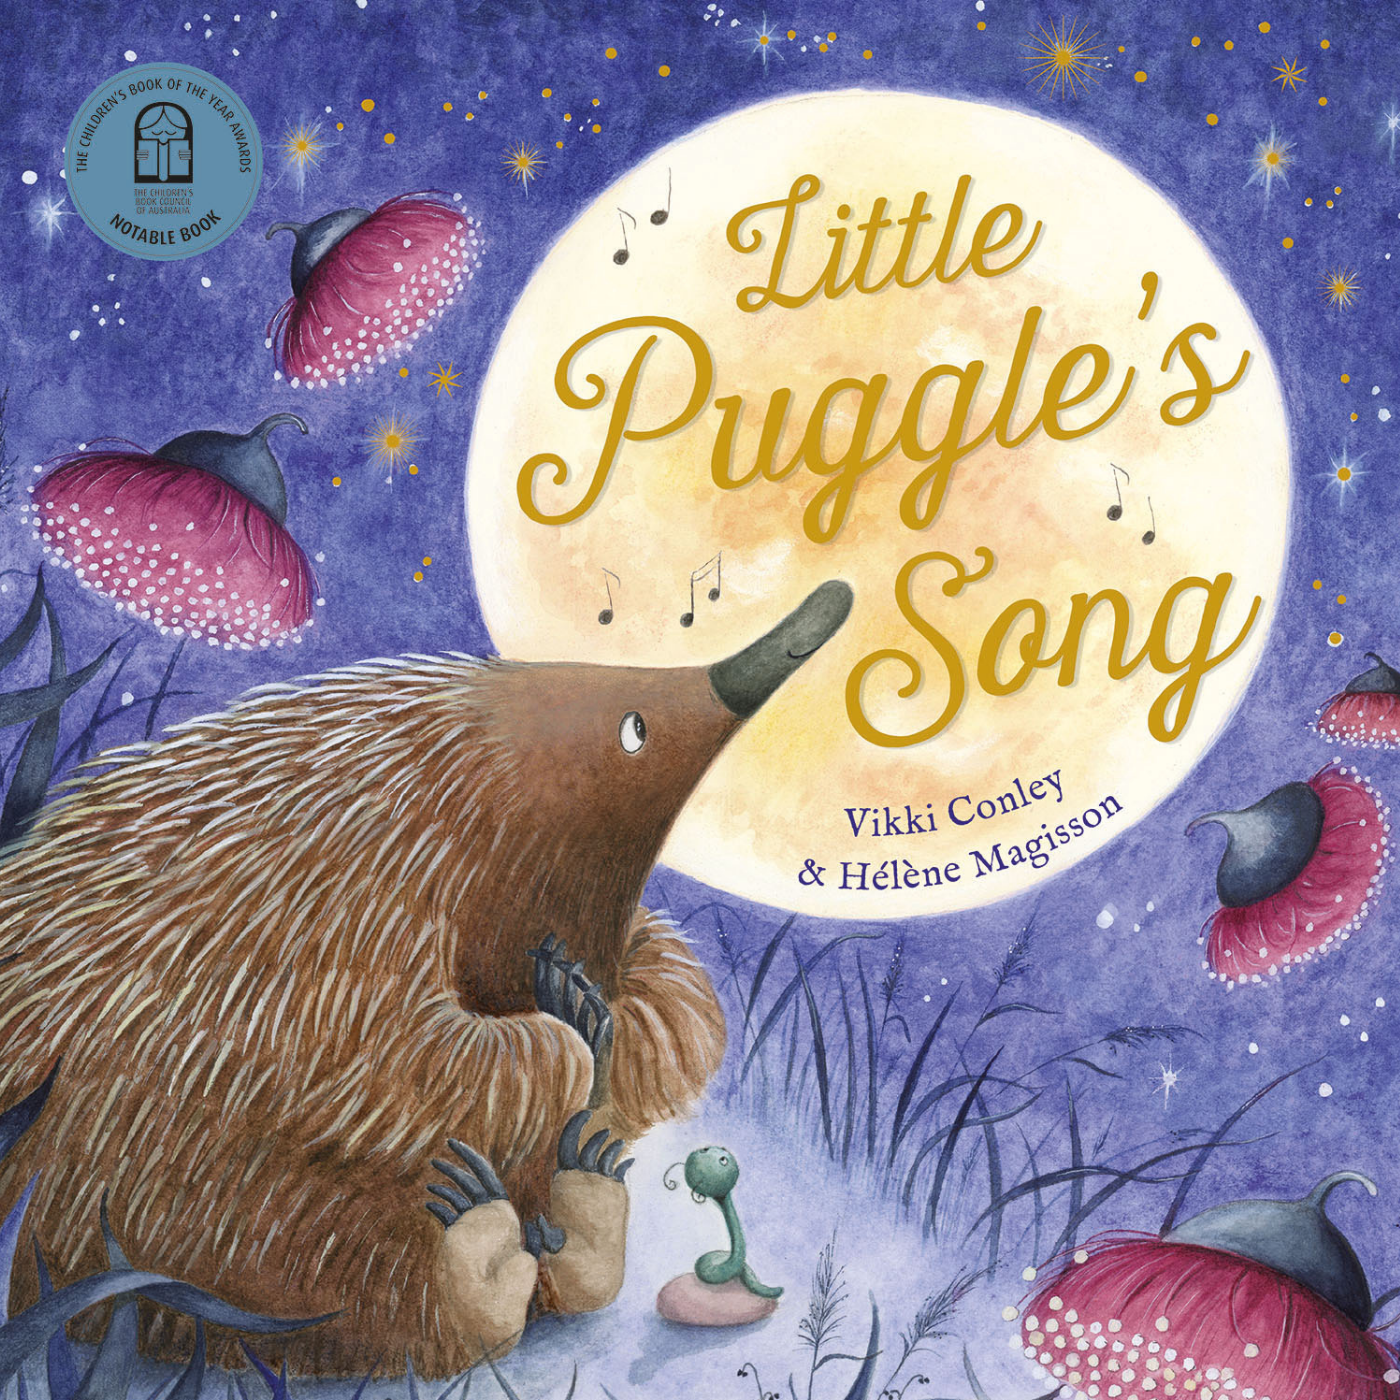 Little Puggle's Song